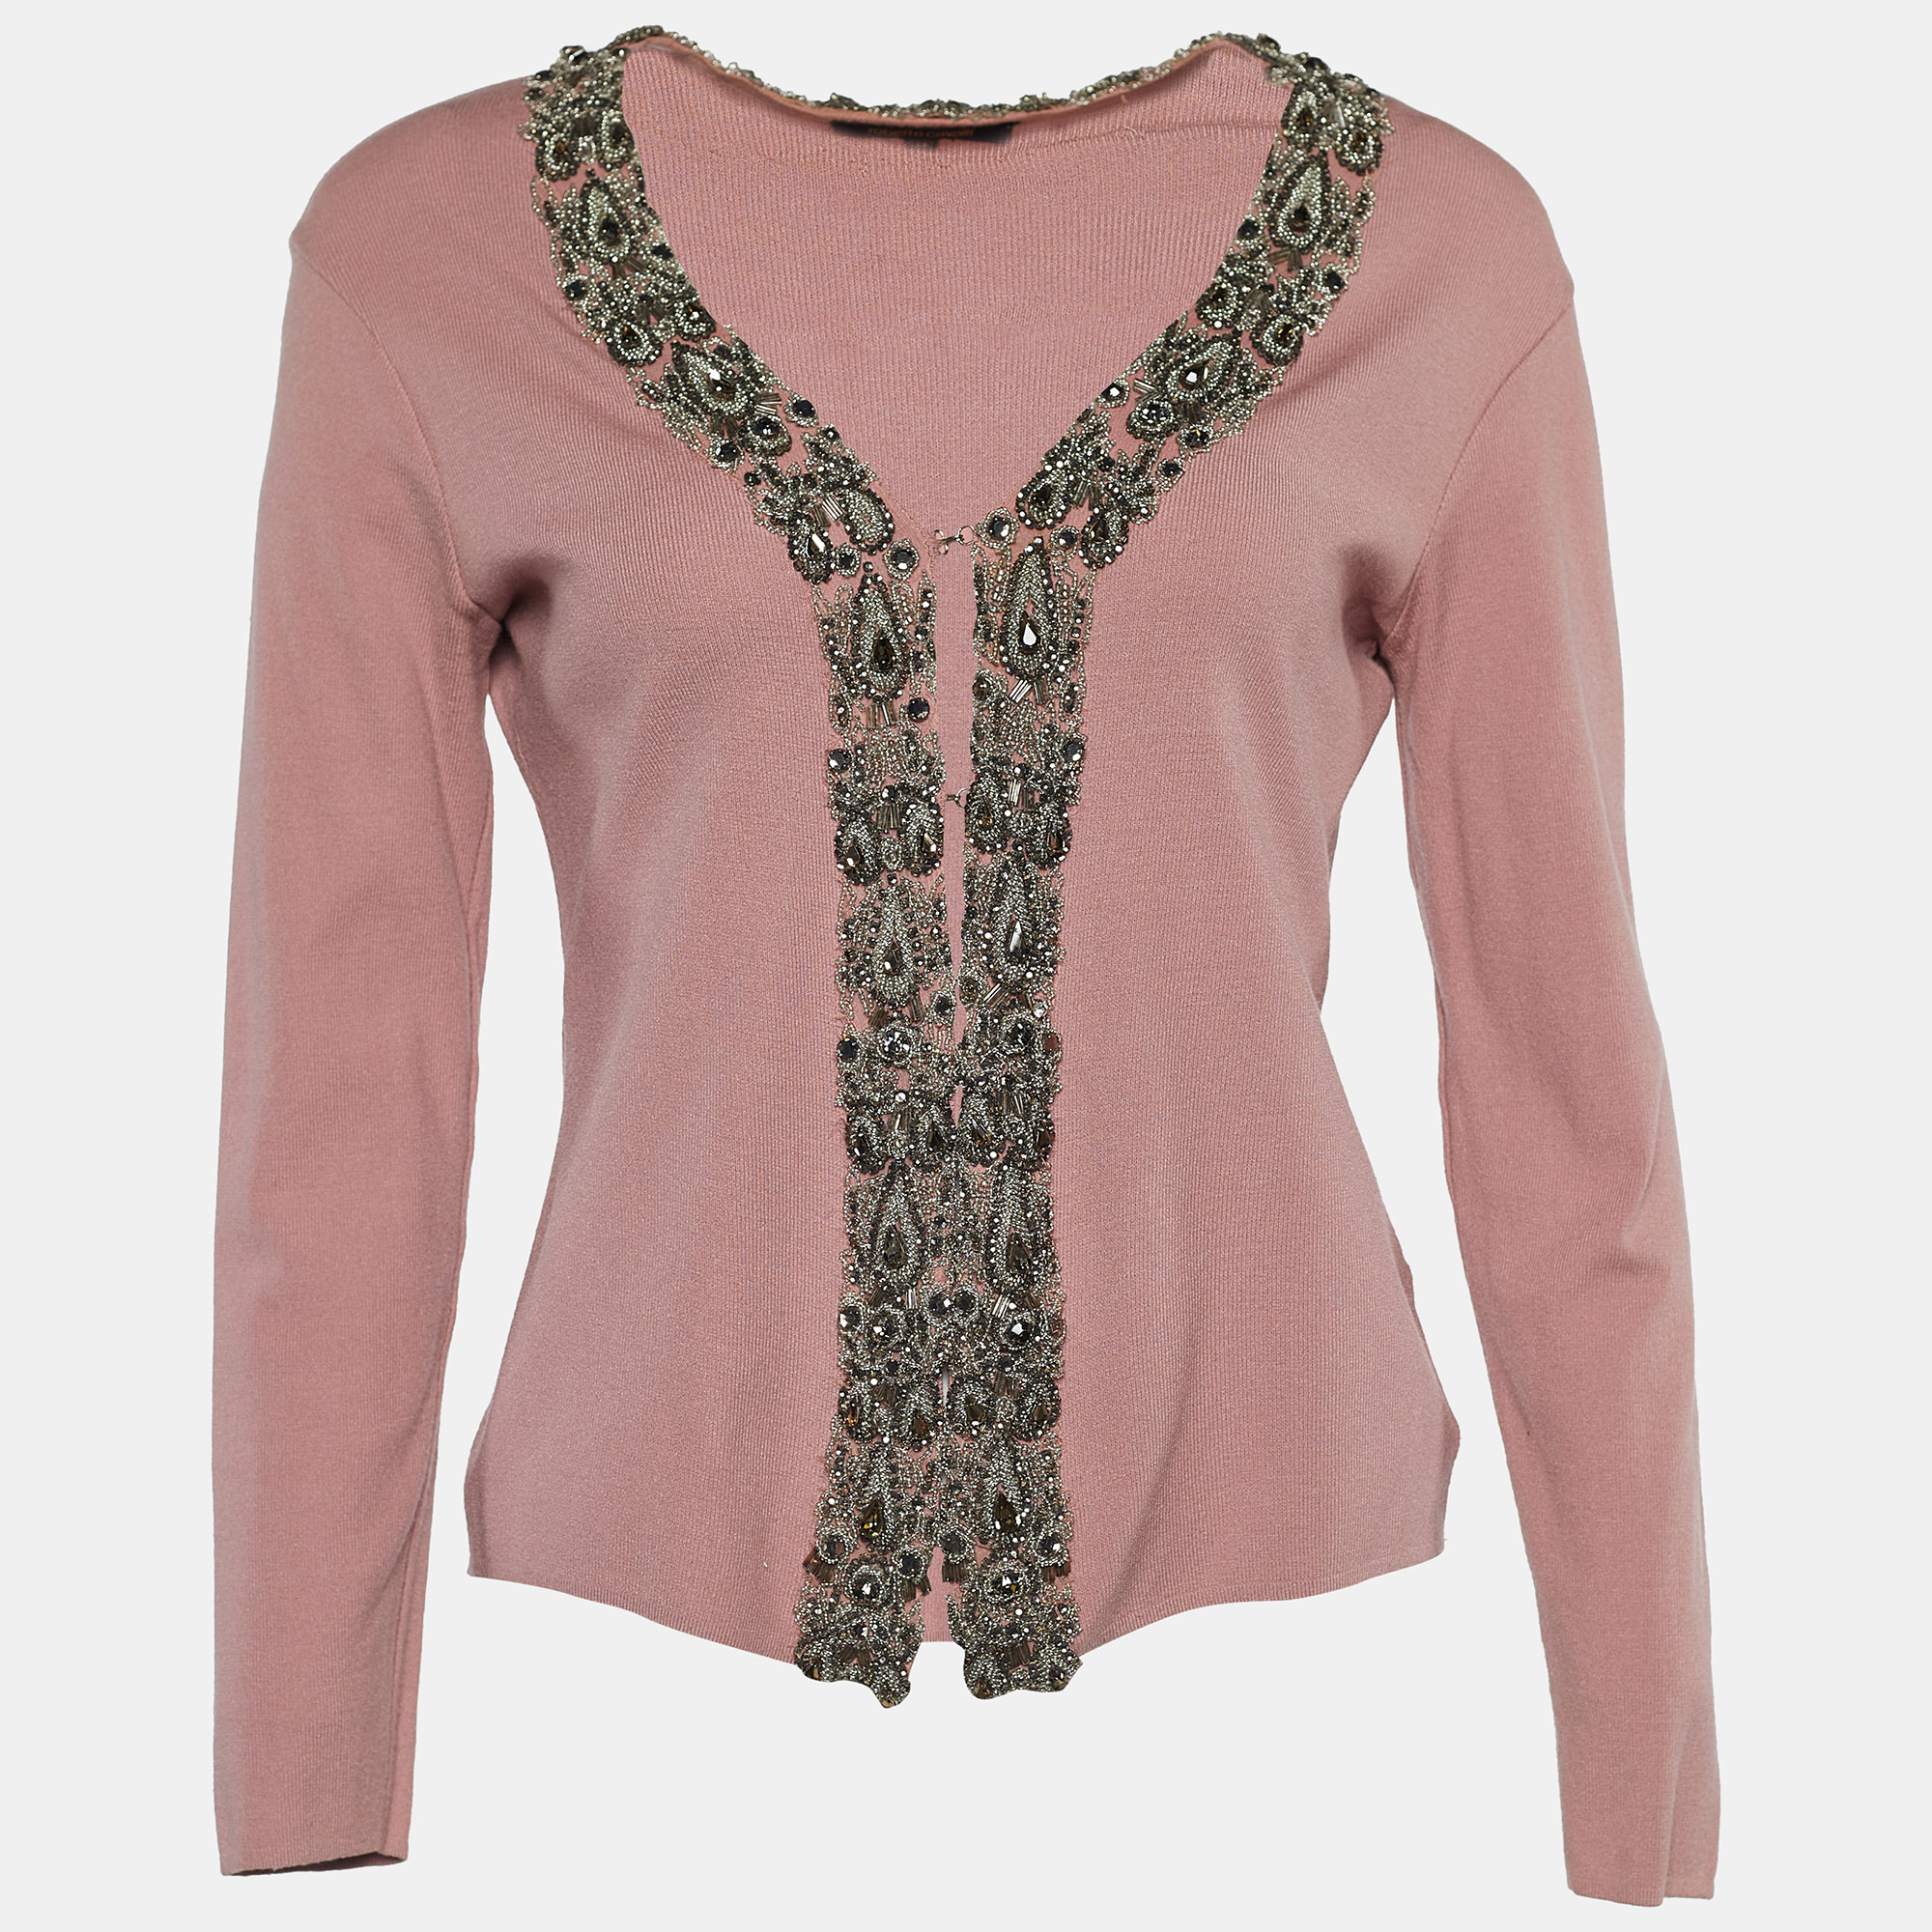 Pre-owned Roberto Cavalli Dusty Pink Crystal Embellished Cardigan L